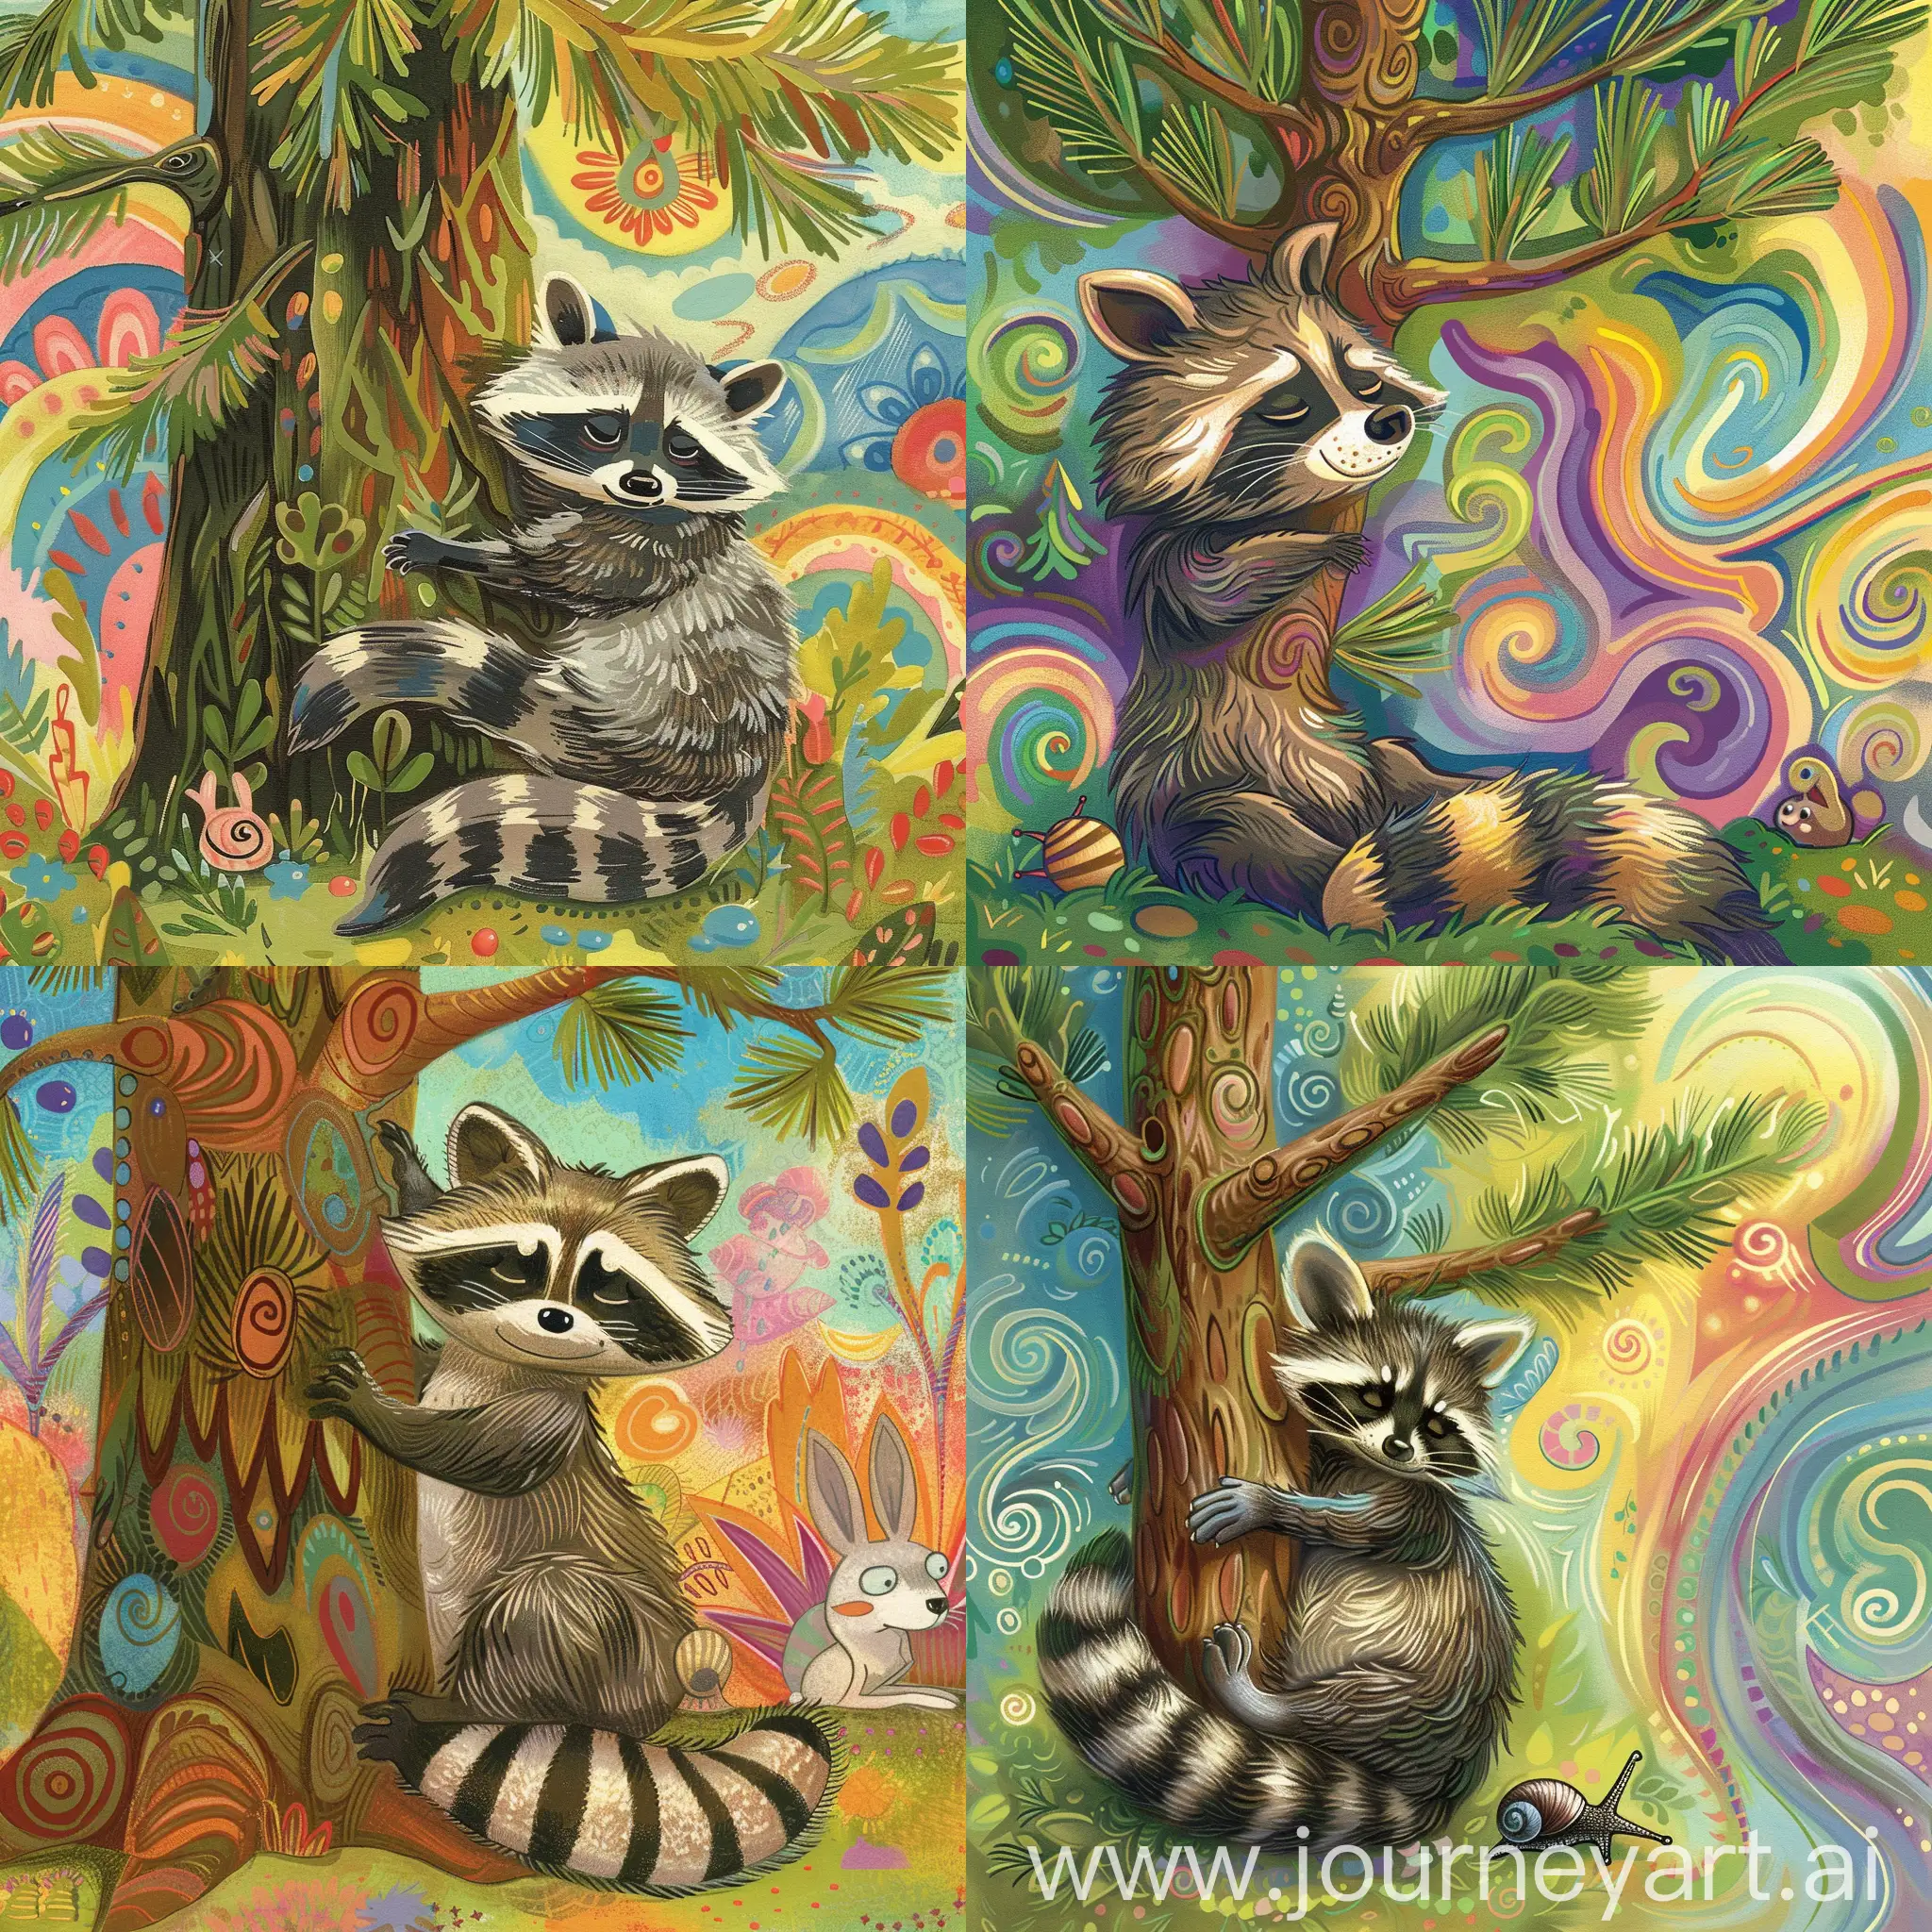 Raccoon leaning against a pine tree in a relaxed pose (focus), woodland cute animal fairy tale style design, rabbit, snail, wolf, charming and friendly whimsical characters on a vibrant and colorful background to capture young readers' attention and spark their imagination.